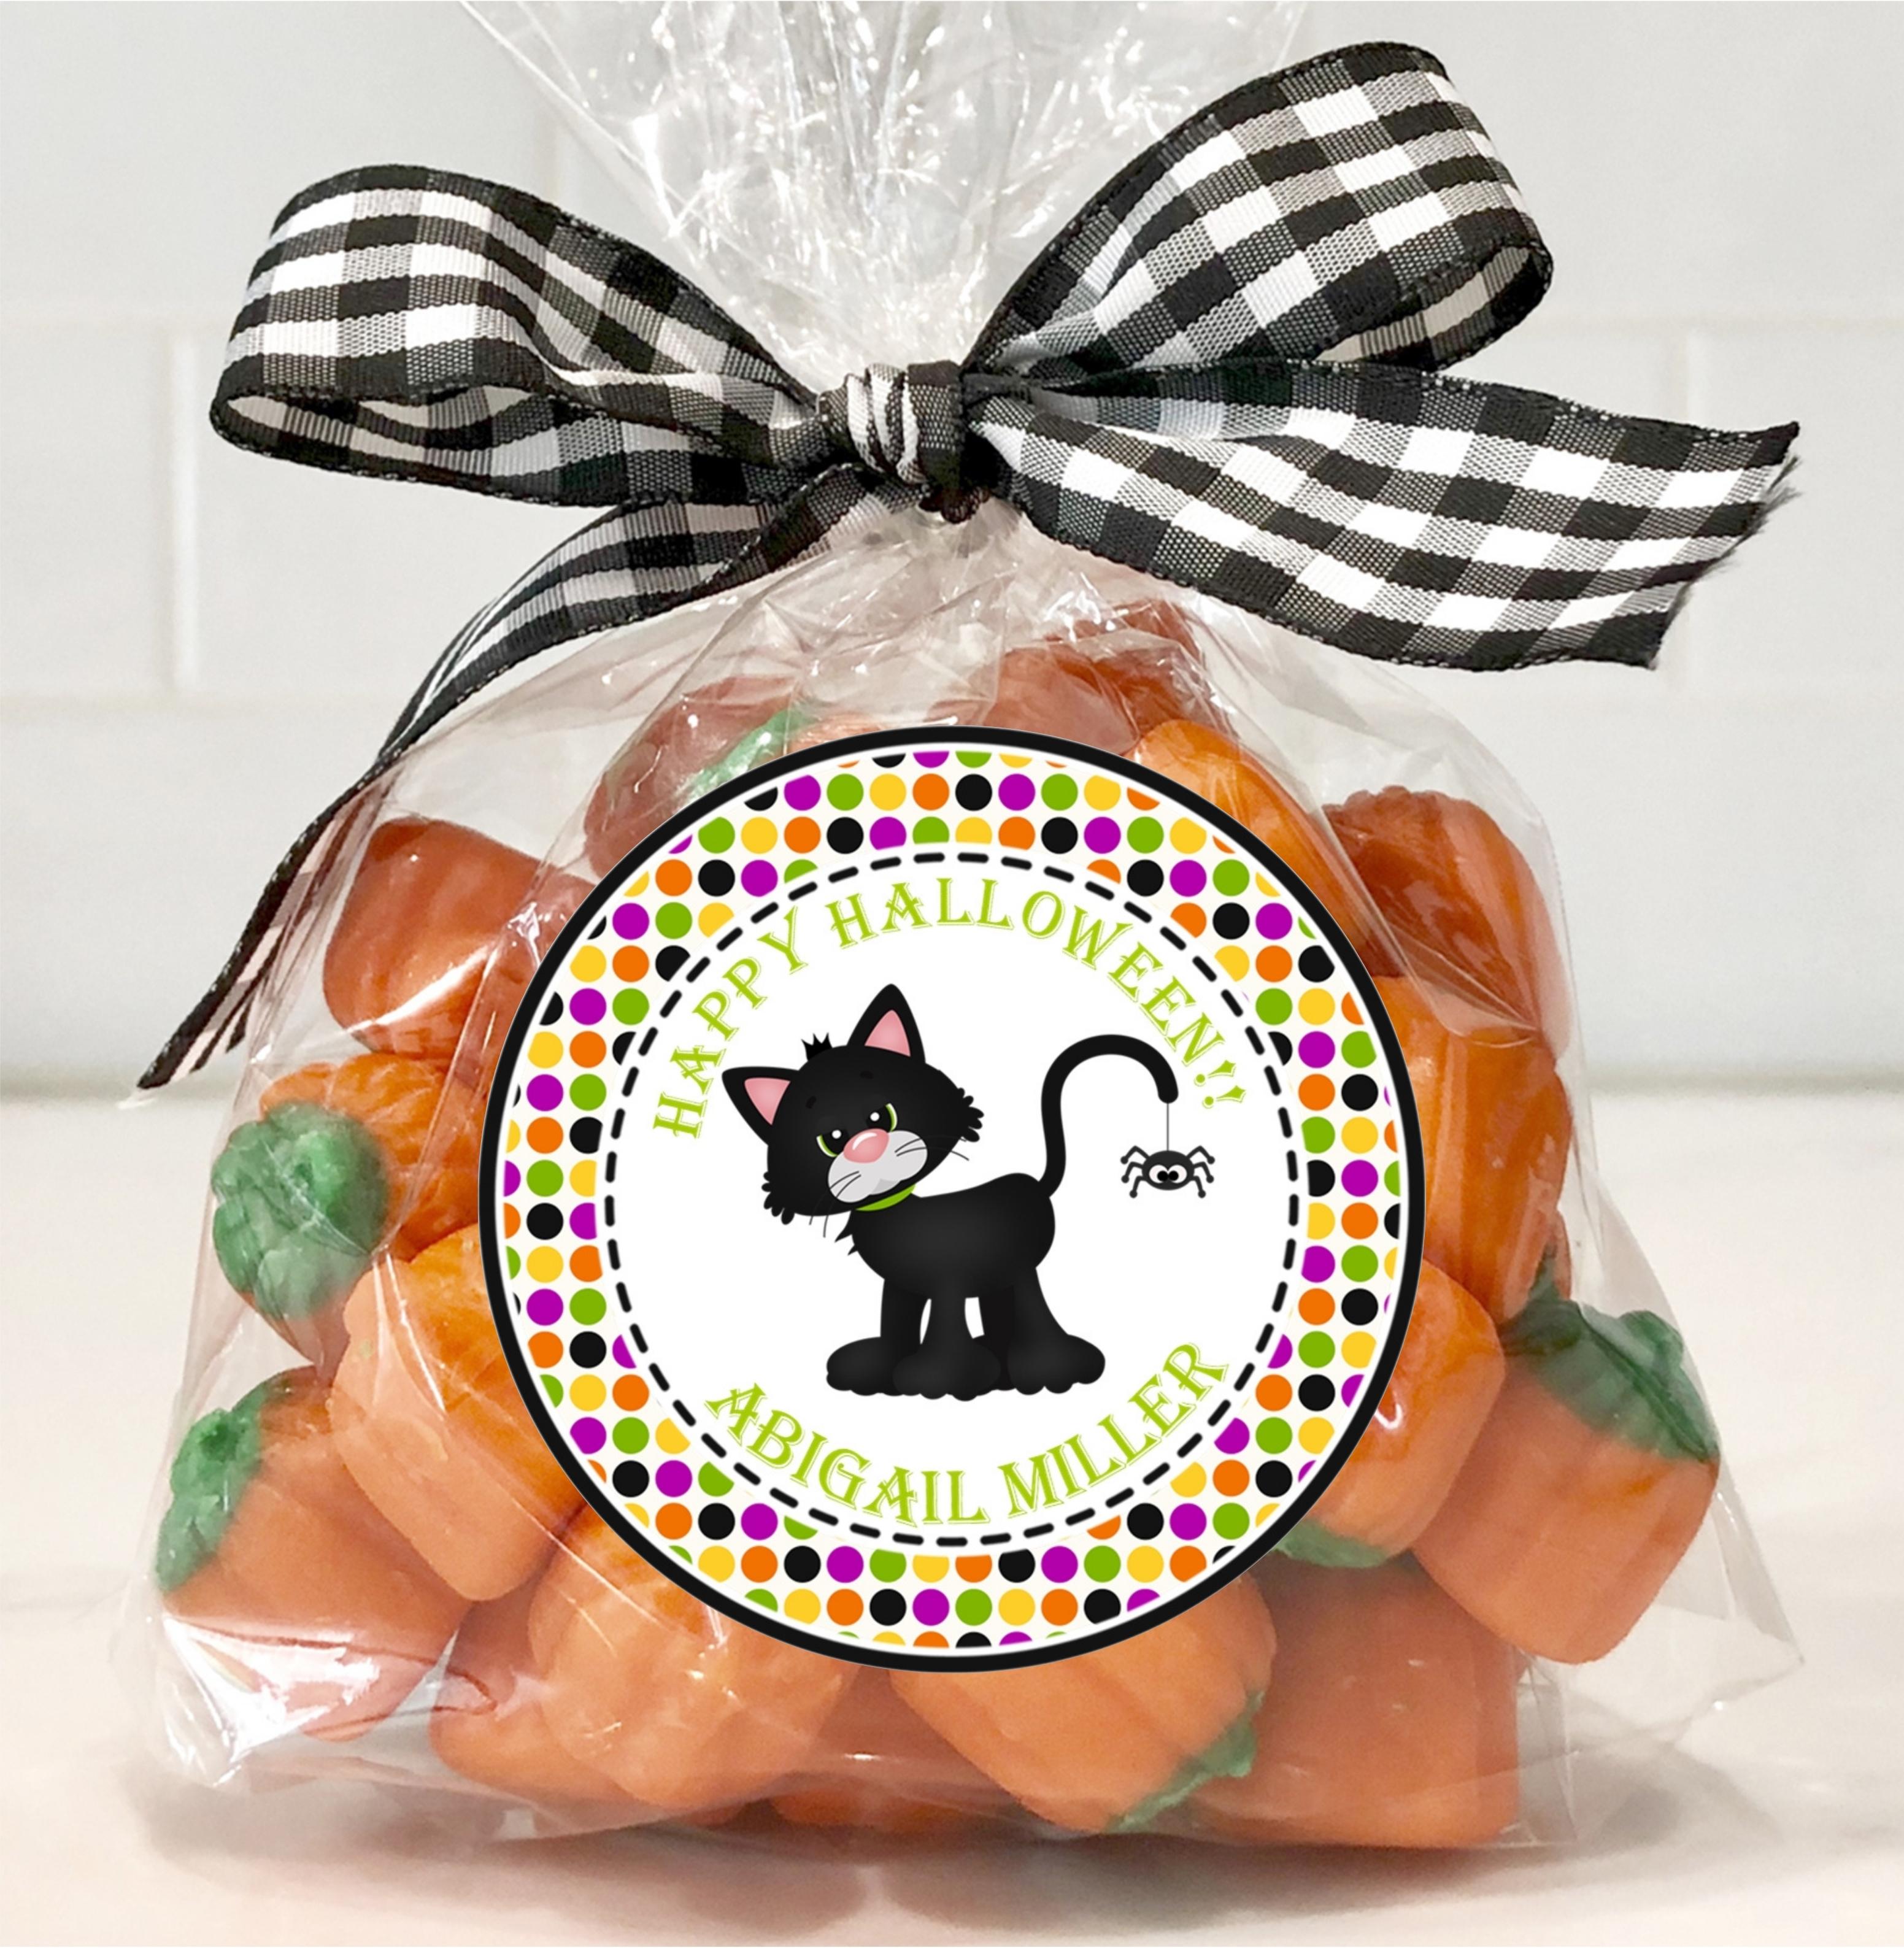 Black Cat Halloween Stickers or Favor Tags